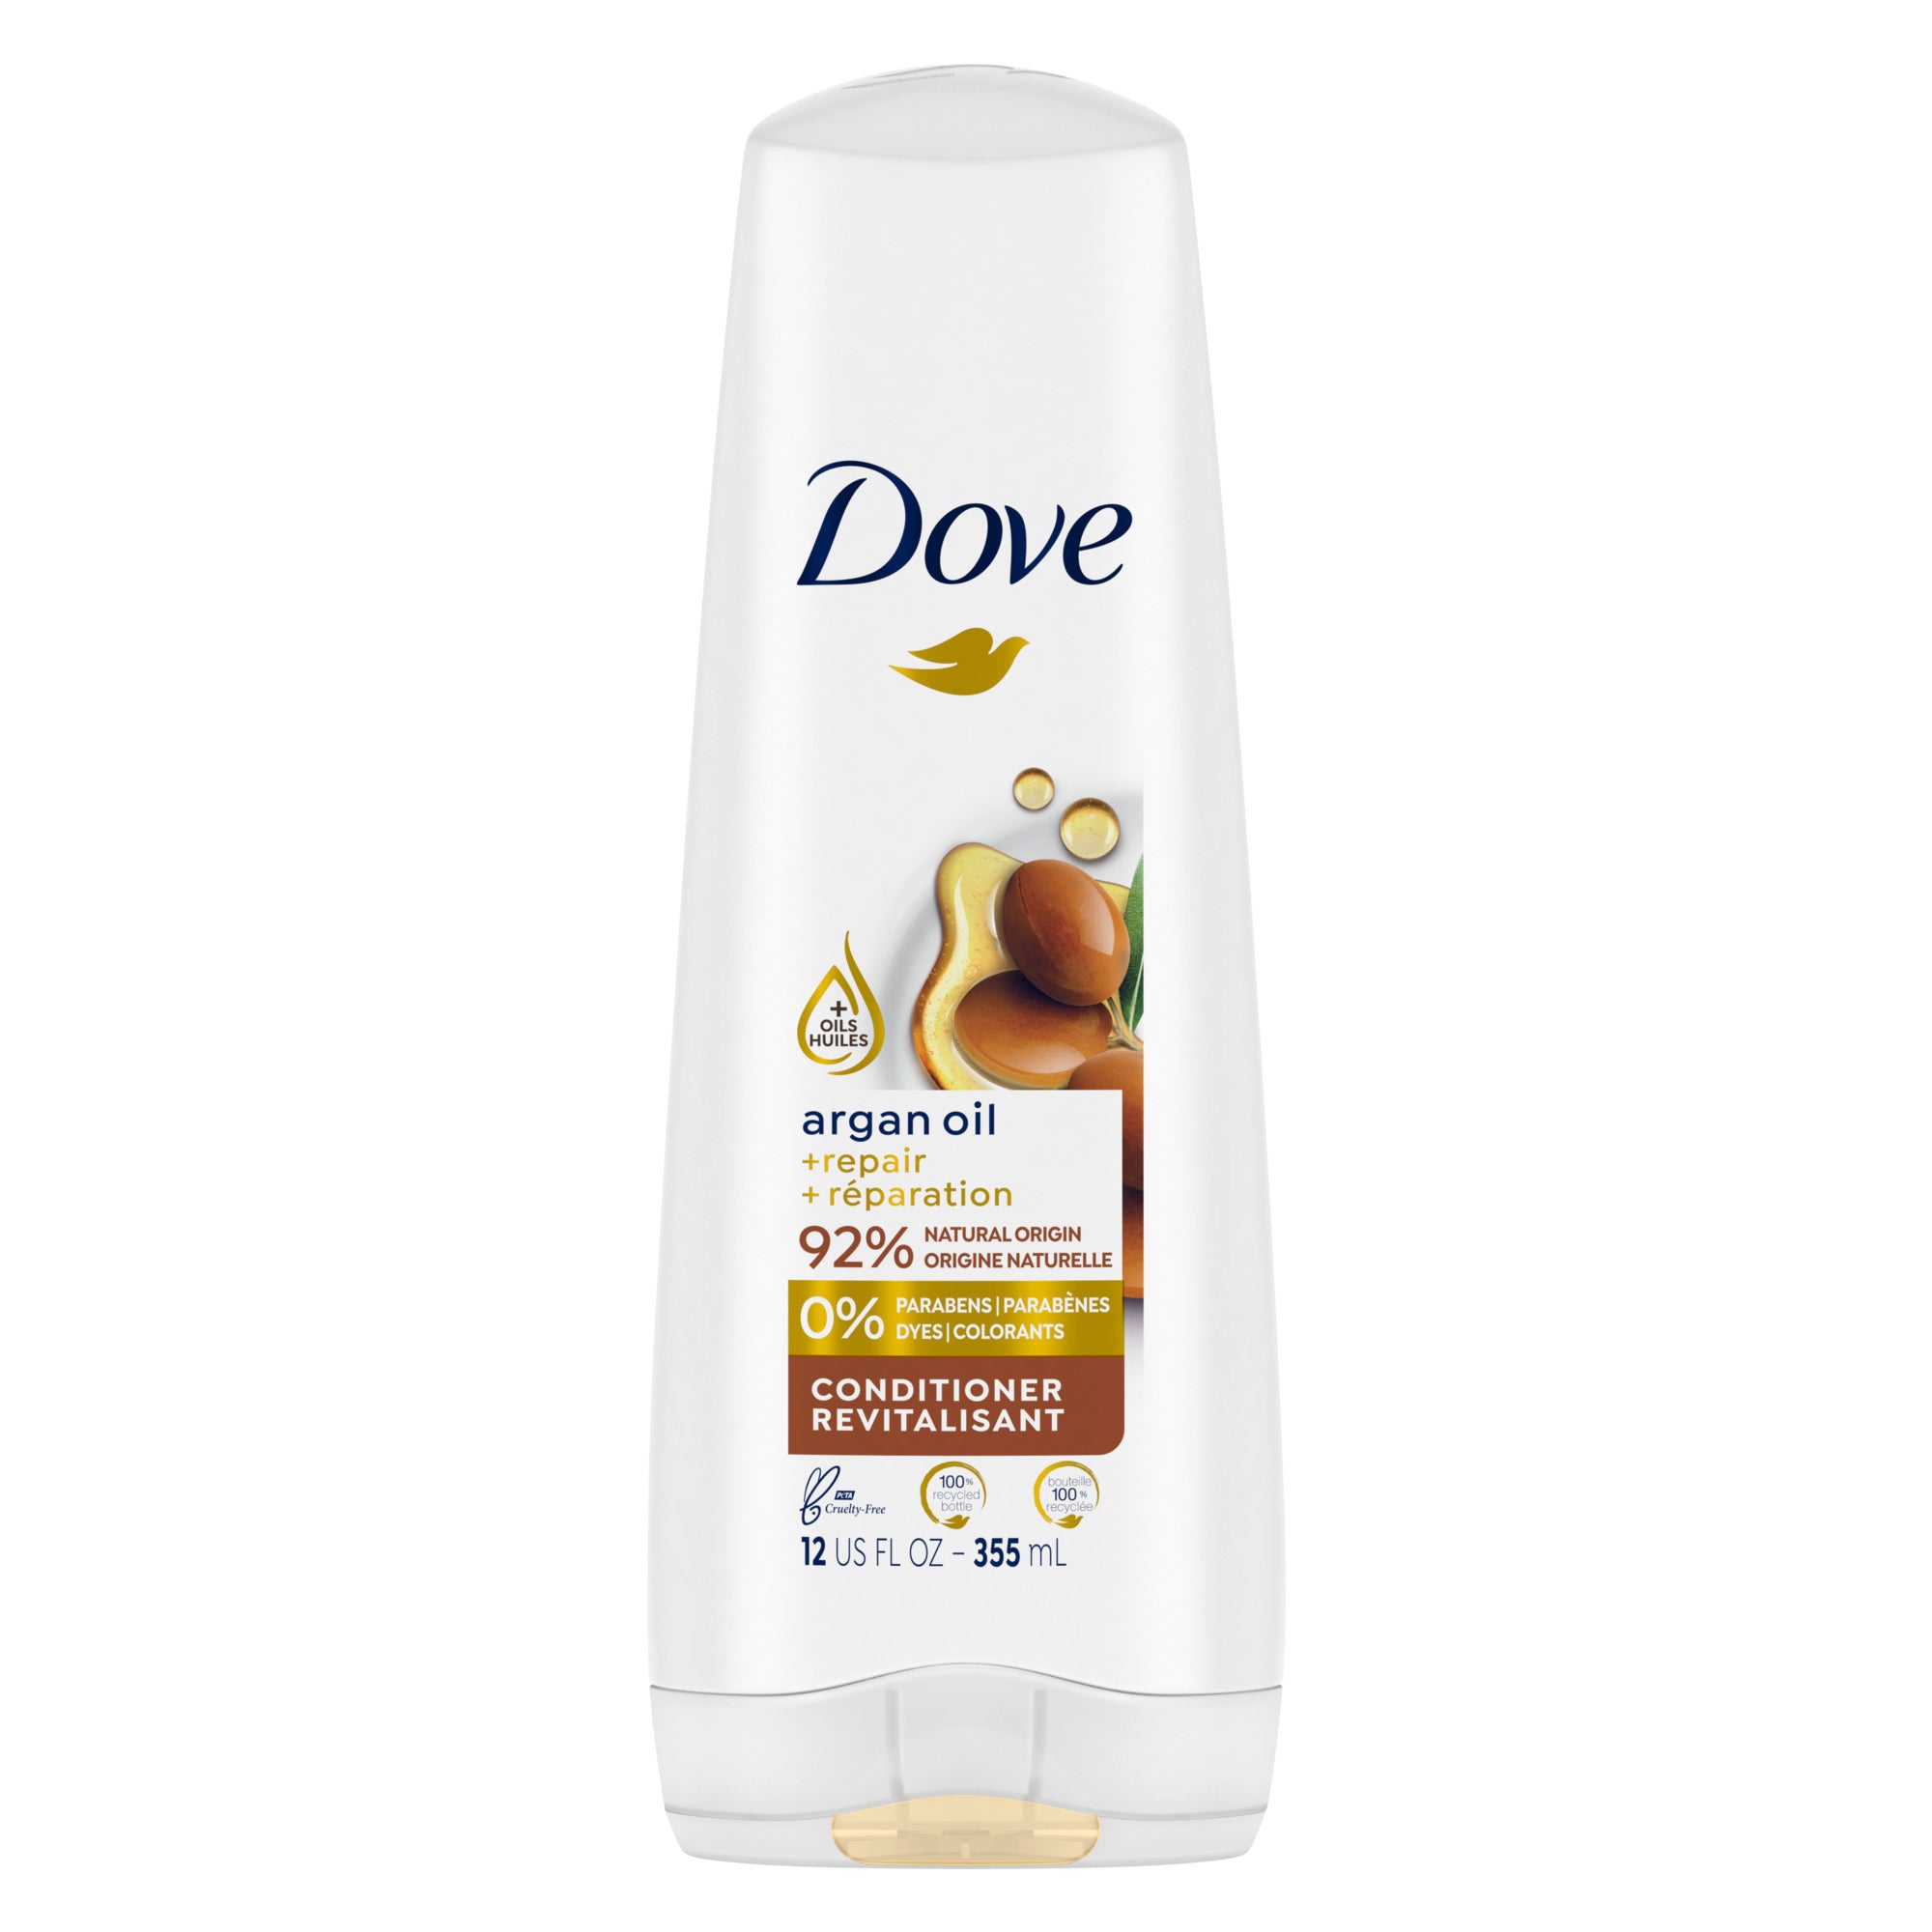 Showing the front angle view of the Dove Argan Oil + Damage Repair Conditioner 355mL product.